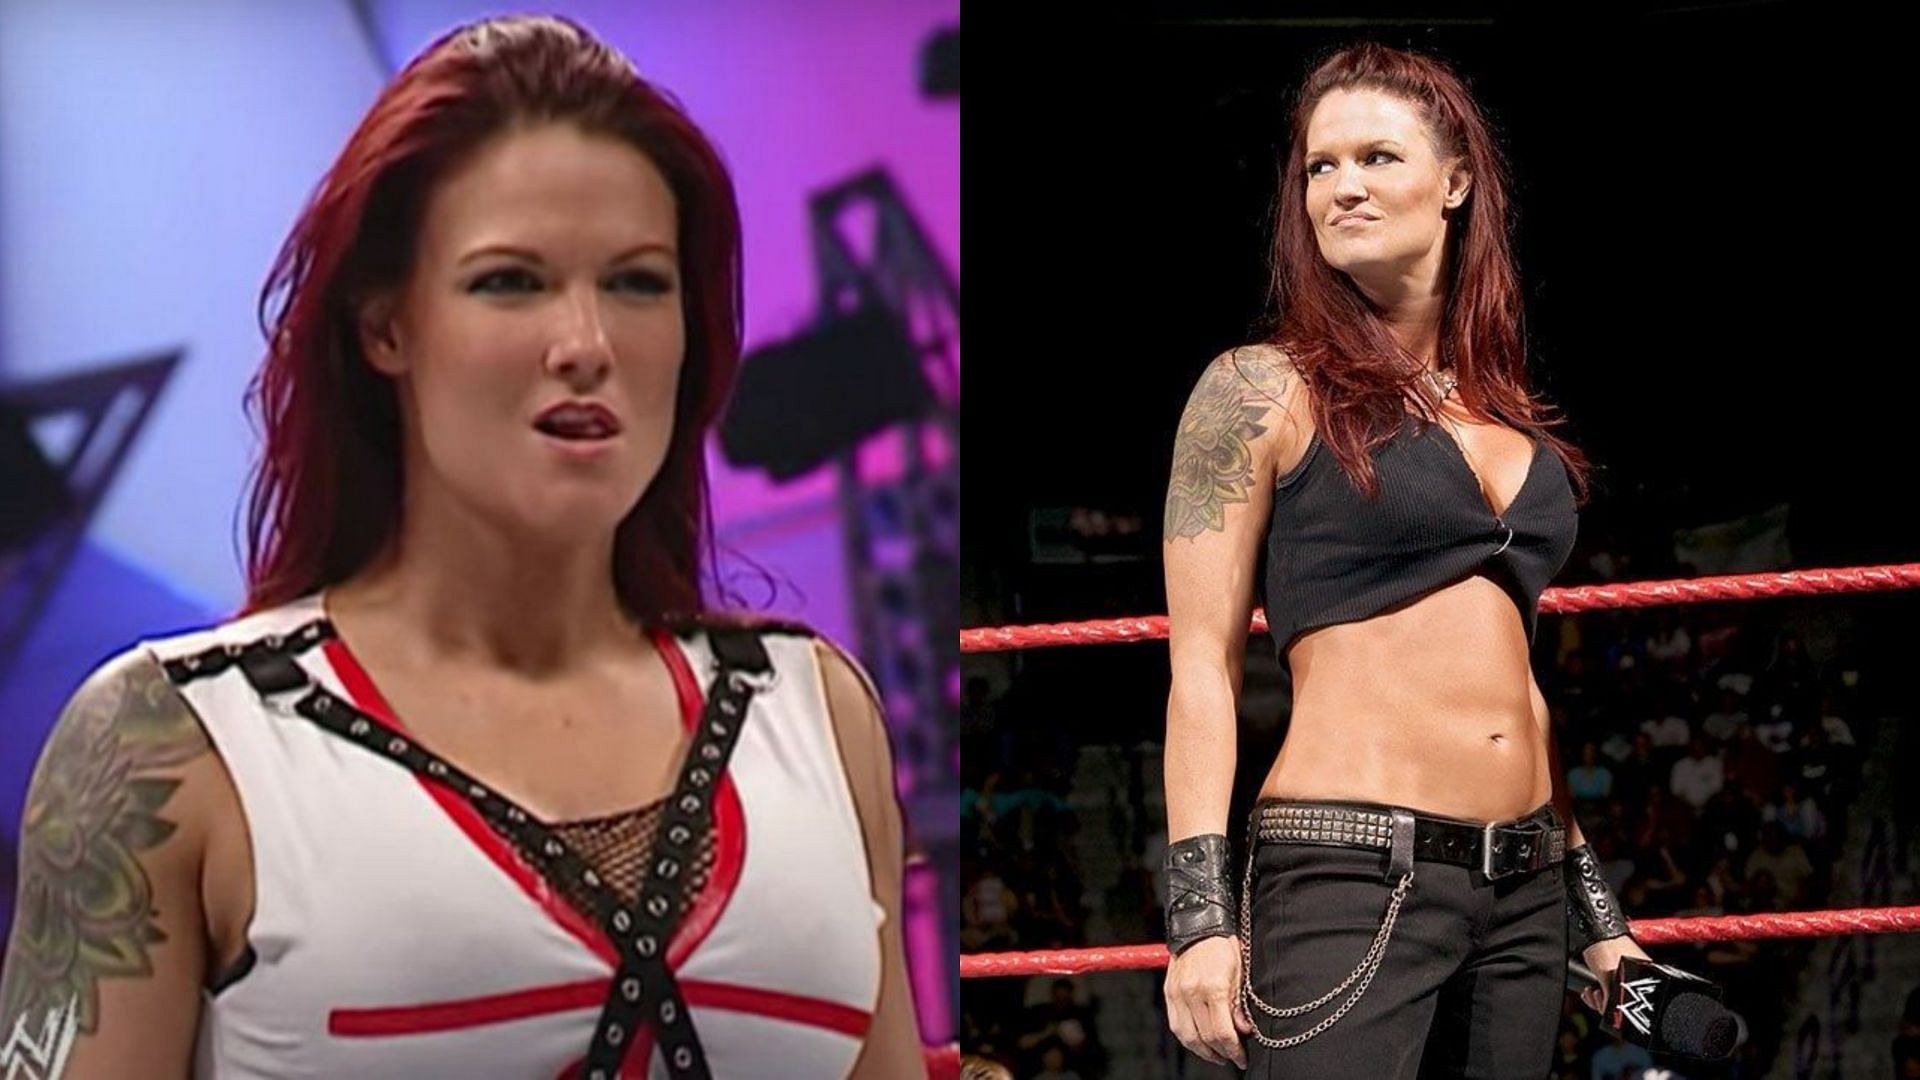 WWE Hall of Famer Lita wanted to film an intimate segment with former superstar